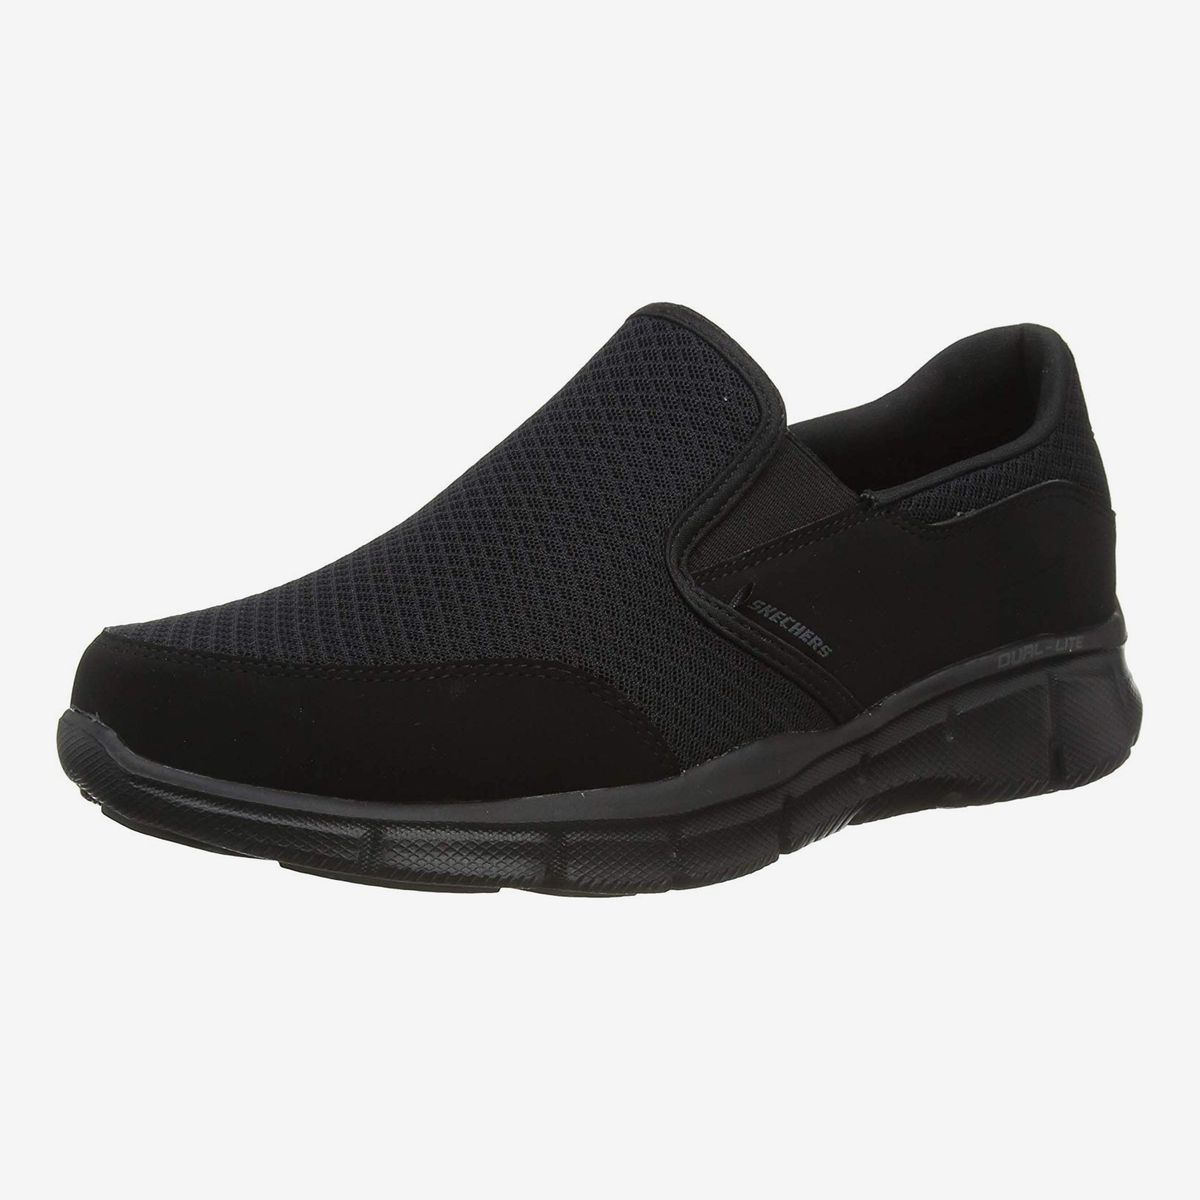 inexpensive slip on shoes